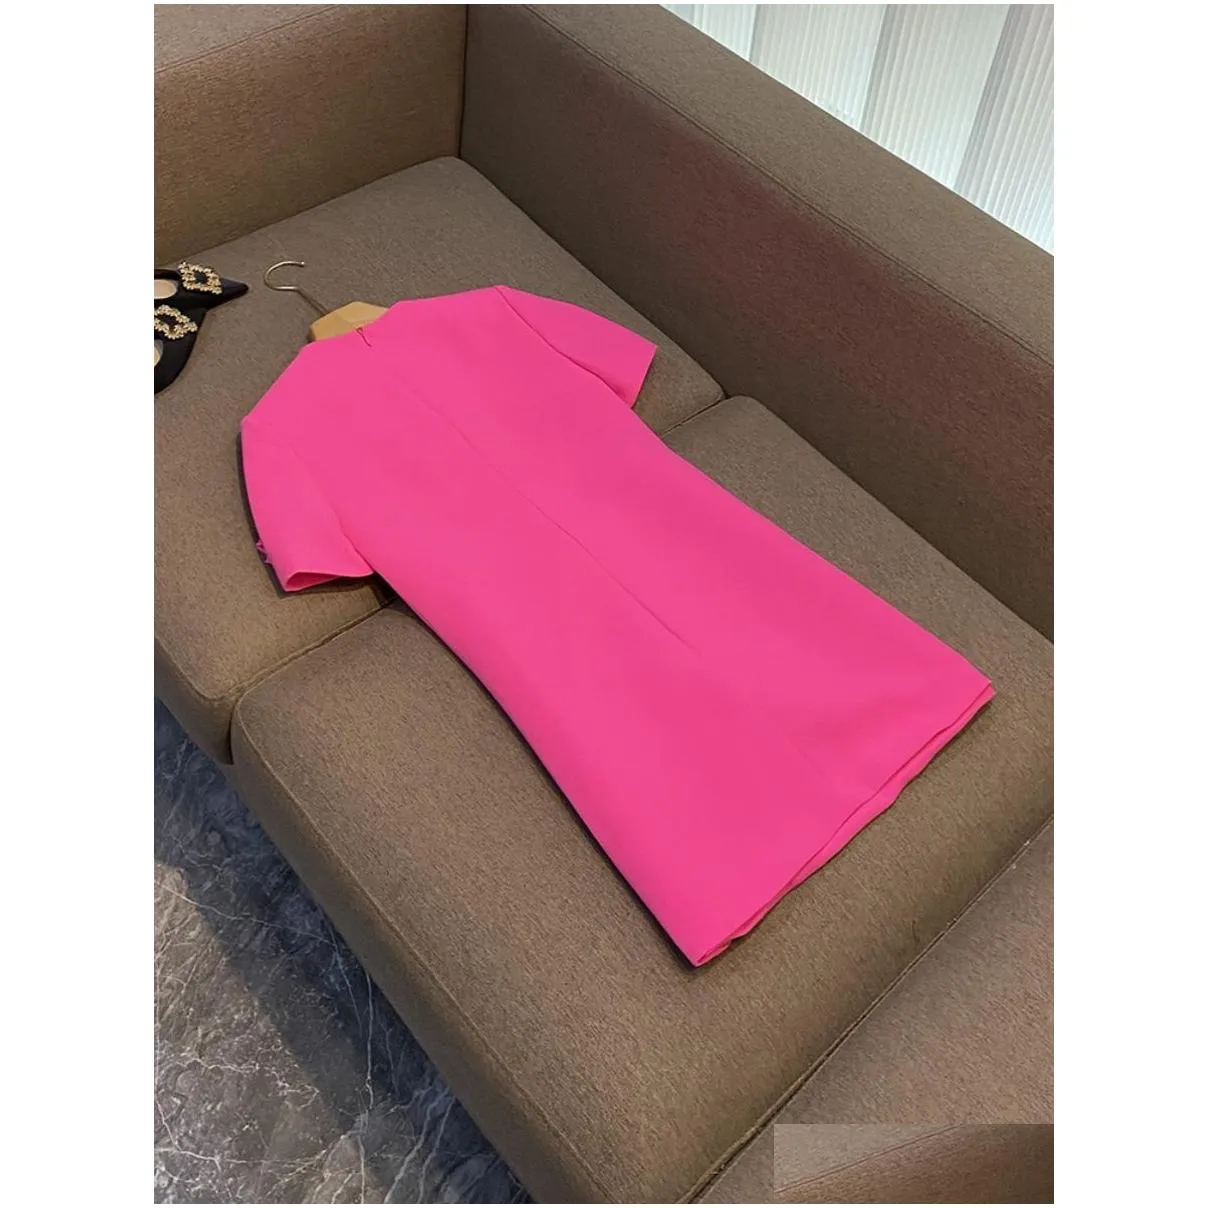 Spring Autumn Hot Pink Solid Color 3D Flowers Panelled Dress Short Sleeve Round Neck Short Casual Dresses O3G292658